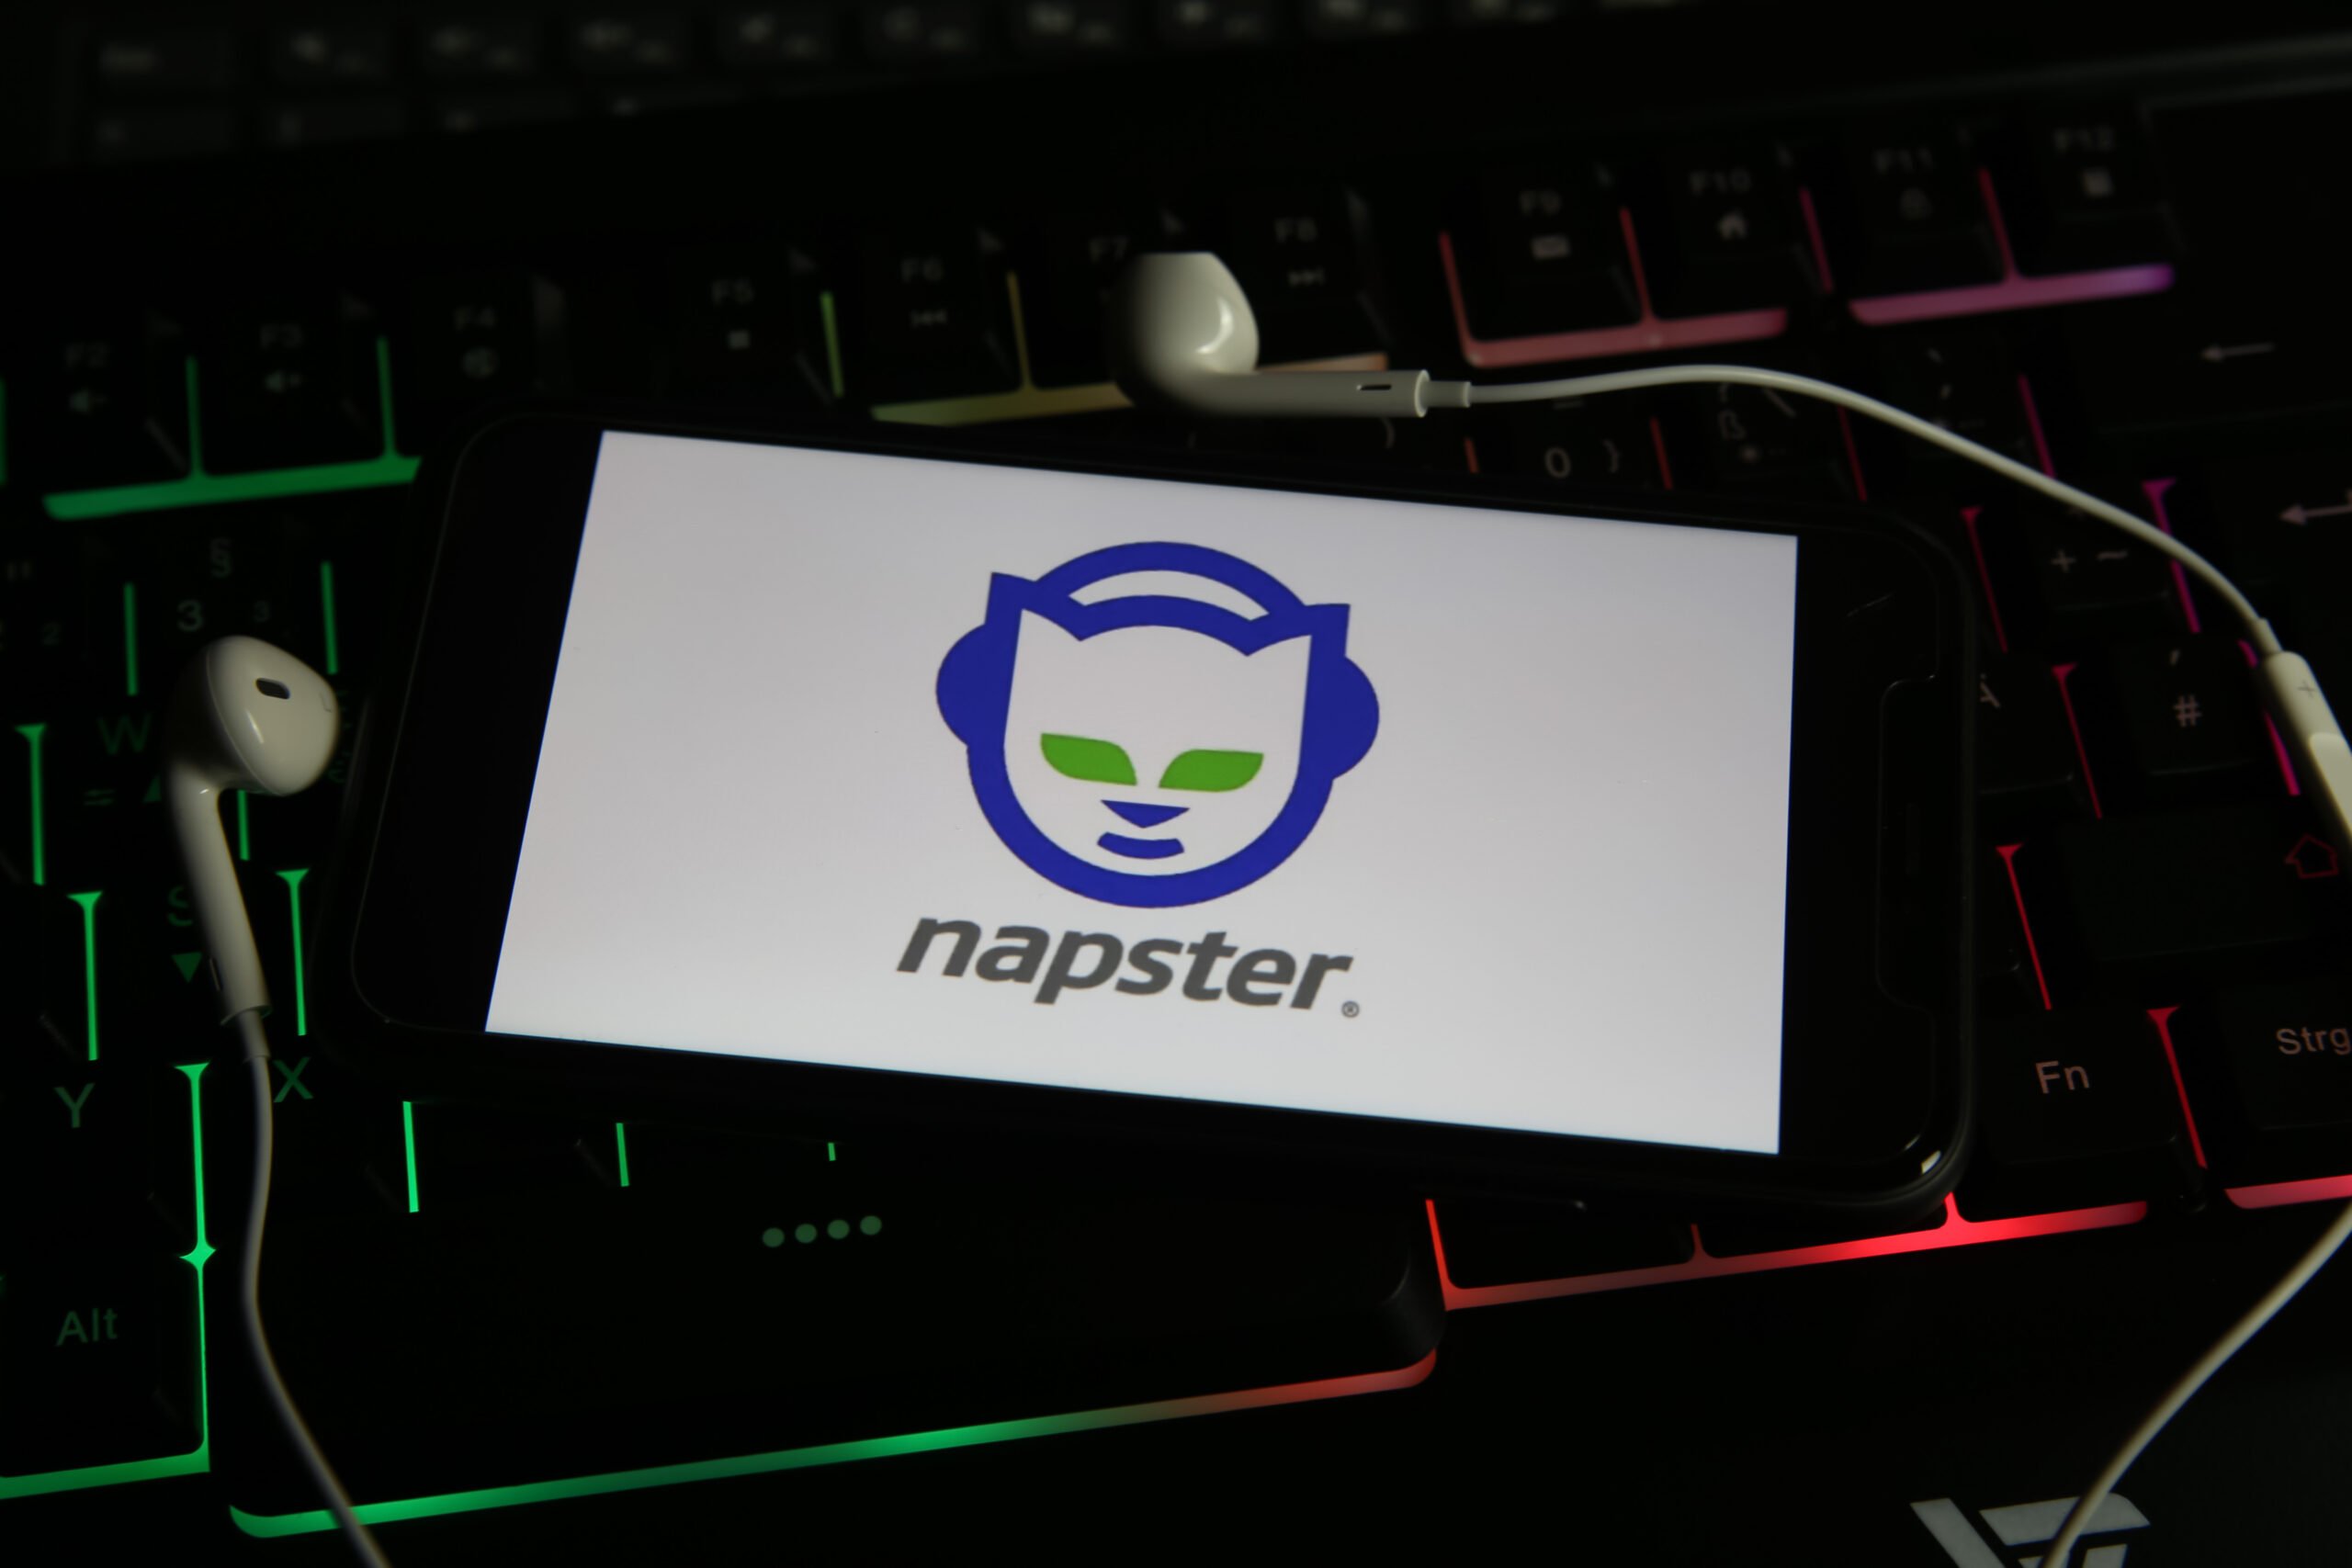 Napster logo with headphones on a keyboard